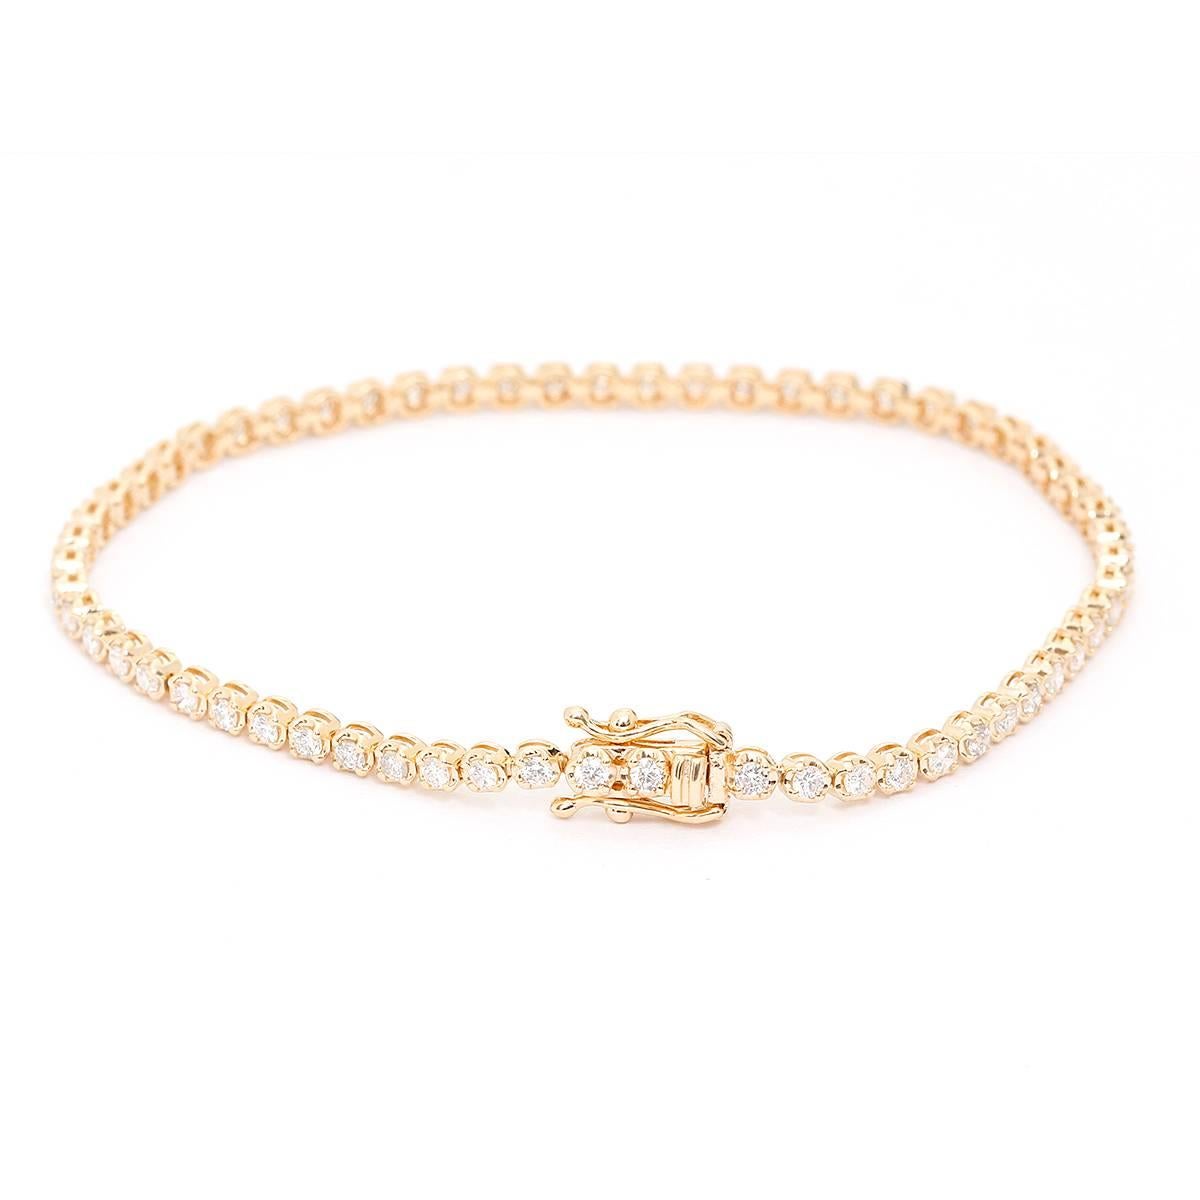 Yellow Gold 1.56 ct. Diamond Tennis Bracelet Size 6 3/4 - . This stunning tennis bracelet features 1.56 carats of SI2-SI3 clarity and HI-color diamonds set in 14k yellow gold. Bracelet measures apx. 6 3/4 inches in length. Total weight is 5.3 grams.